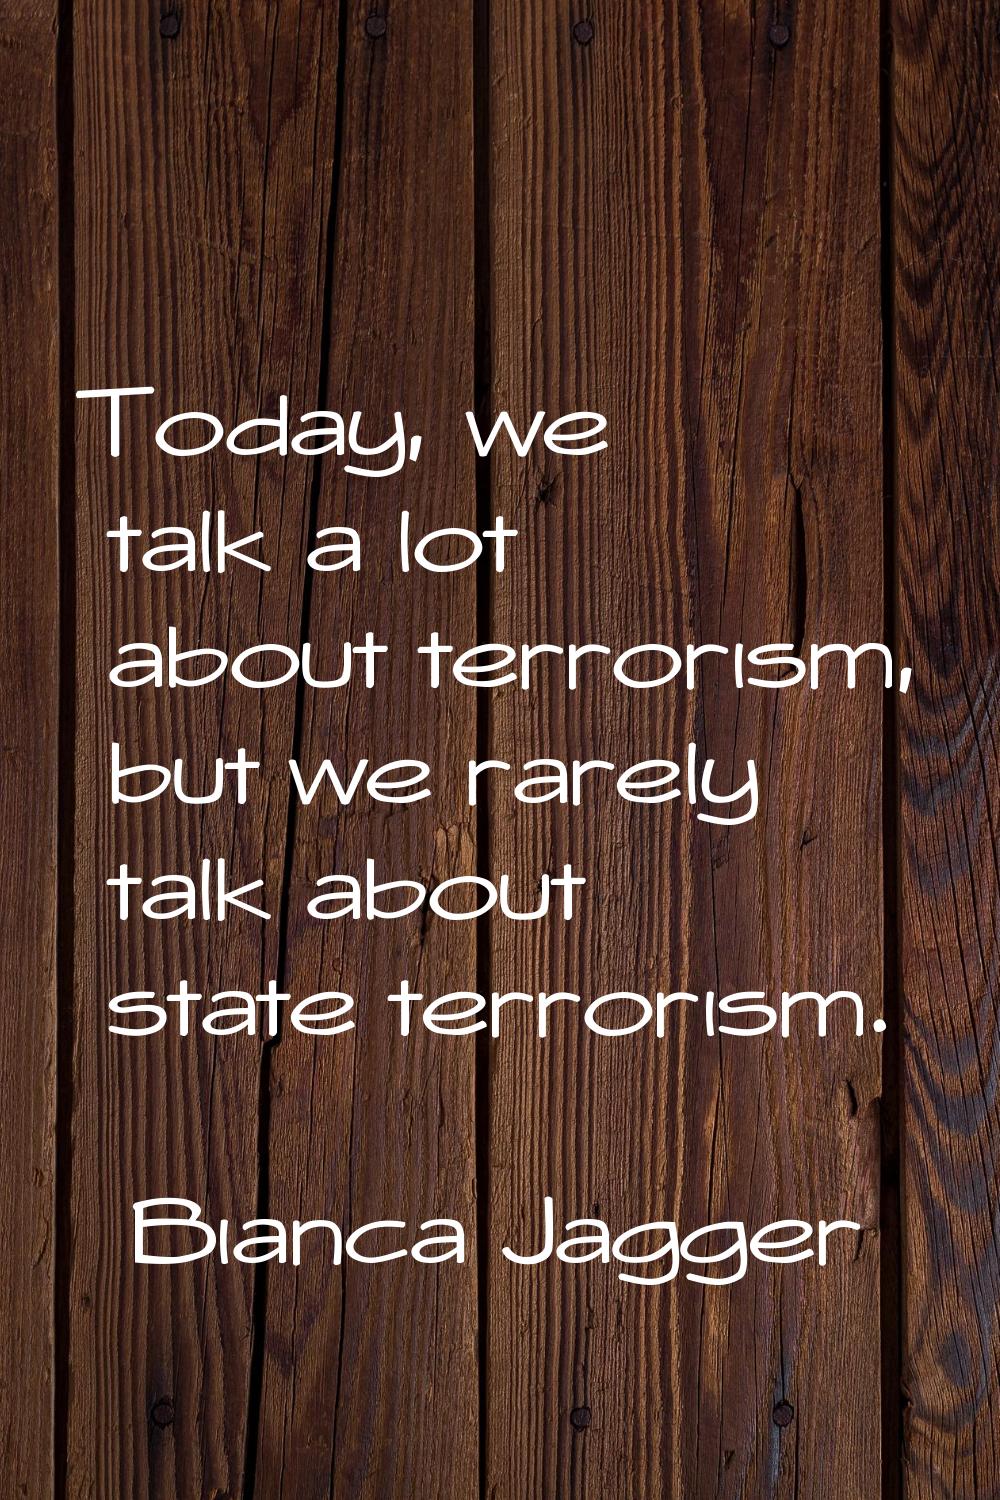 Today, we talk a lot about terrorism, but we rarely talk about state terrorism.